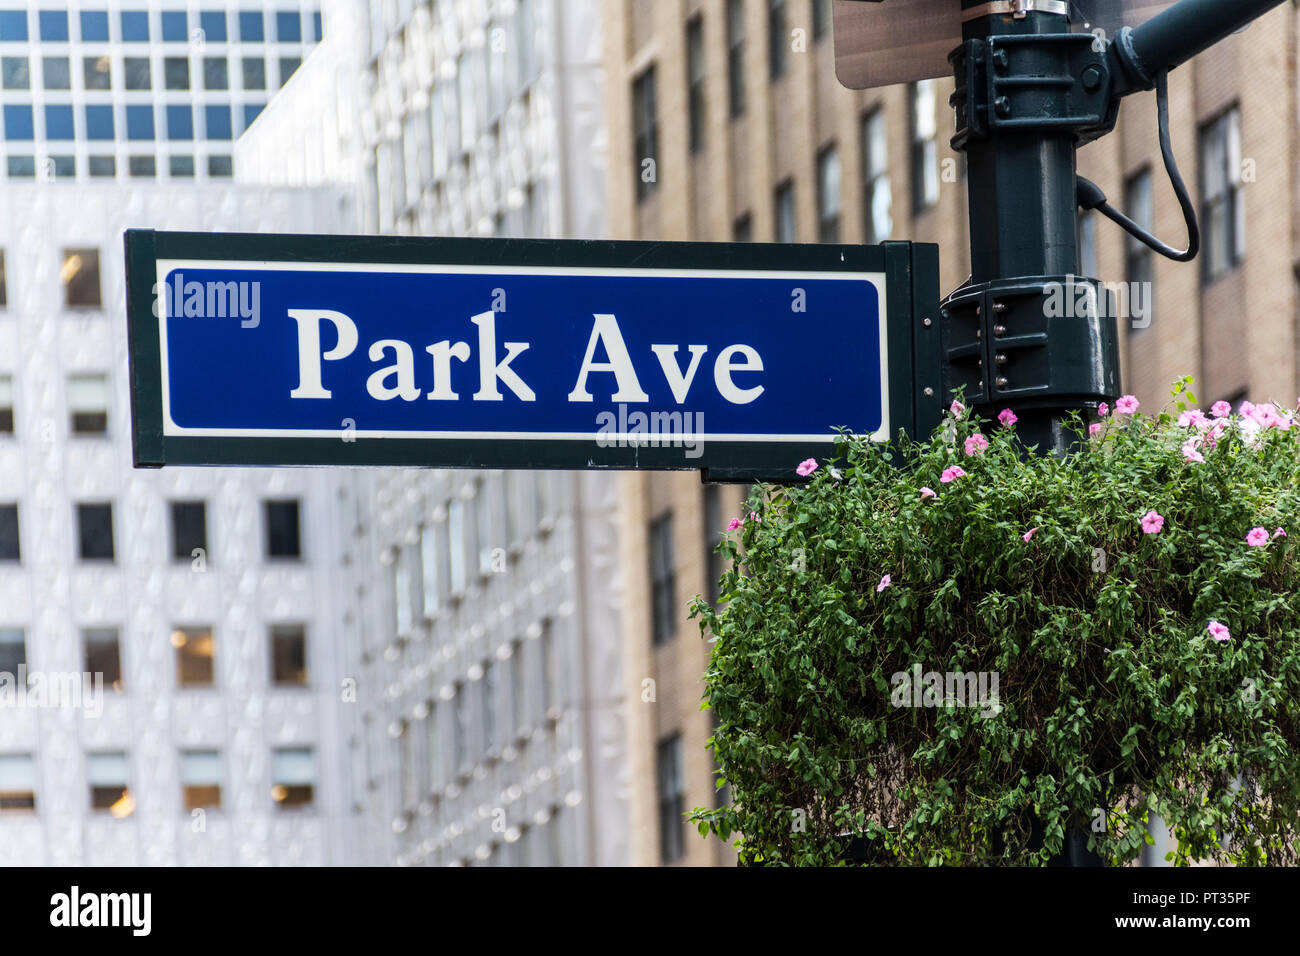 Street sign of Park Ave of New York in the USA Stock Photo